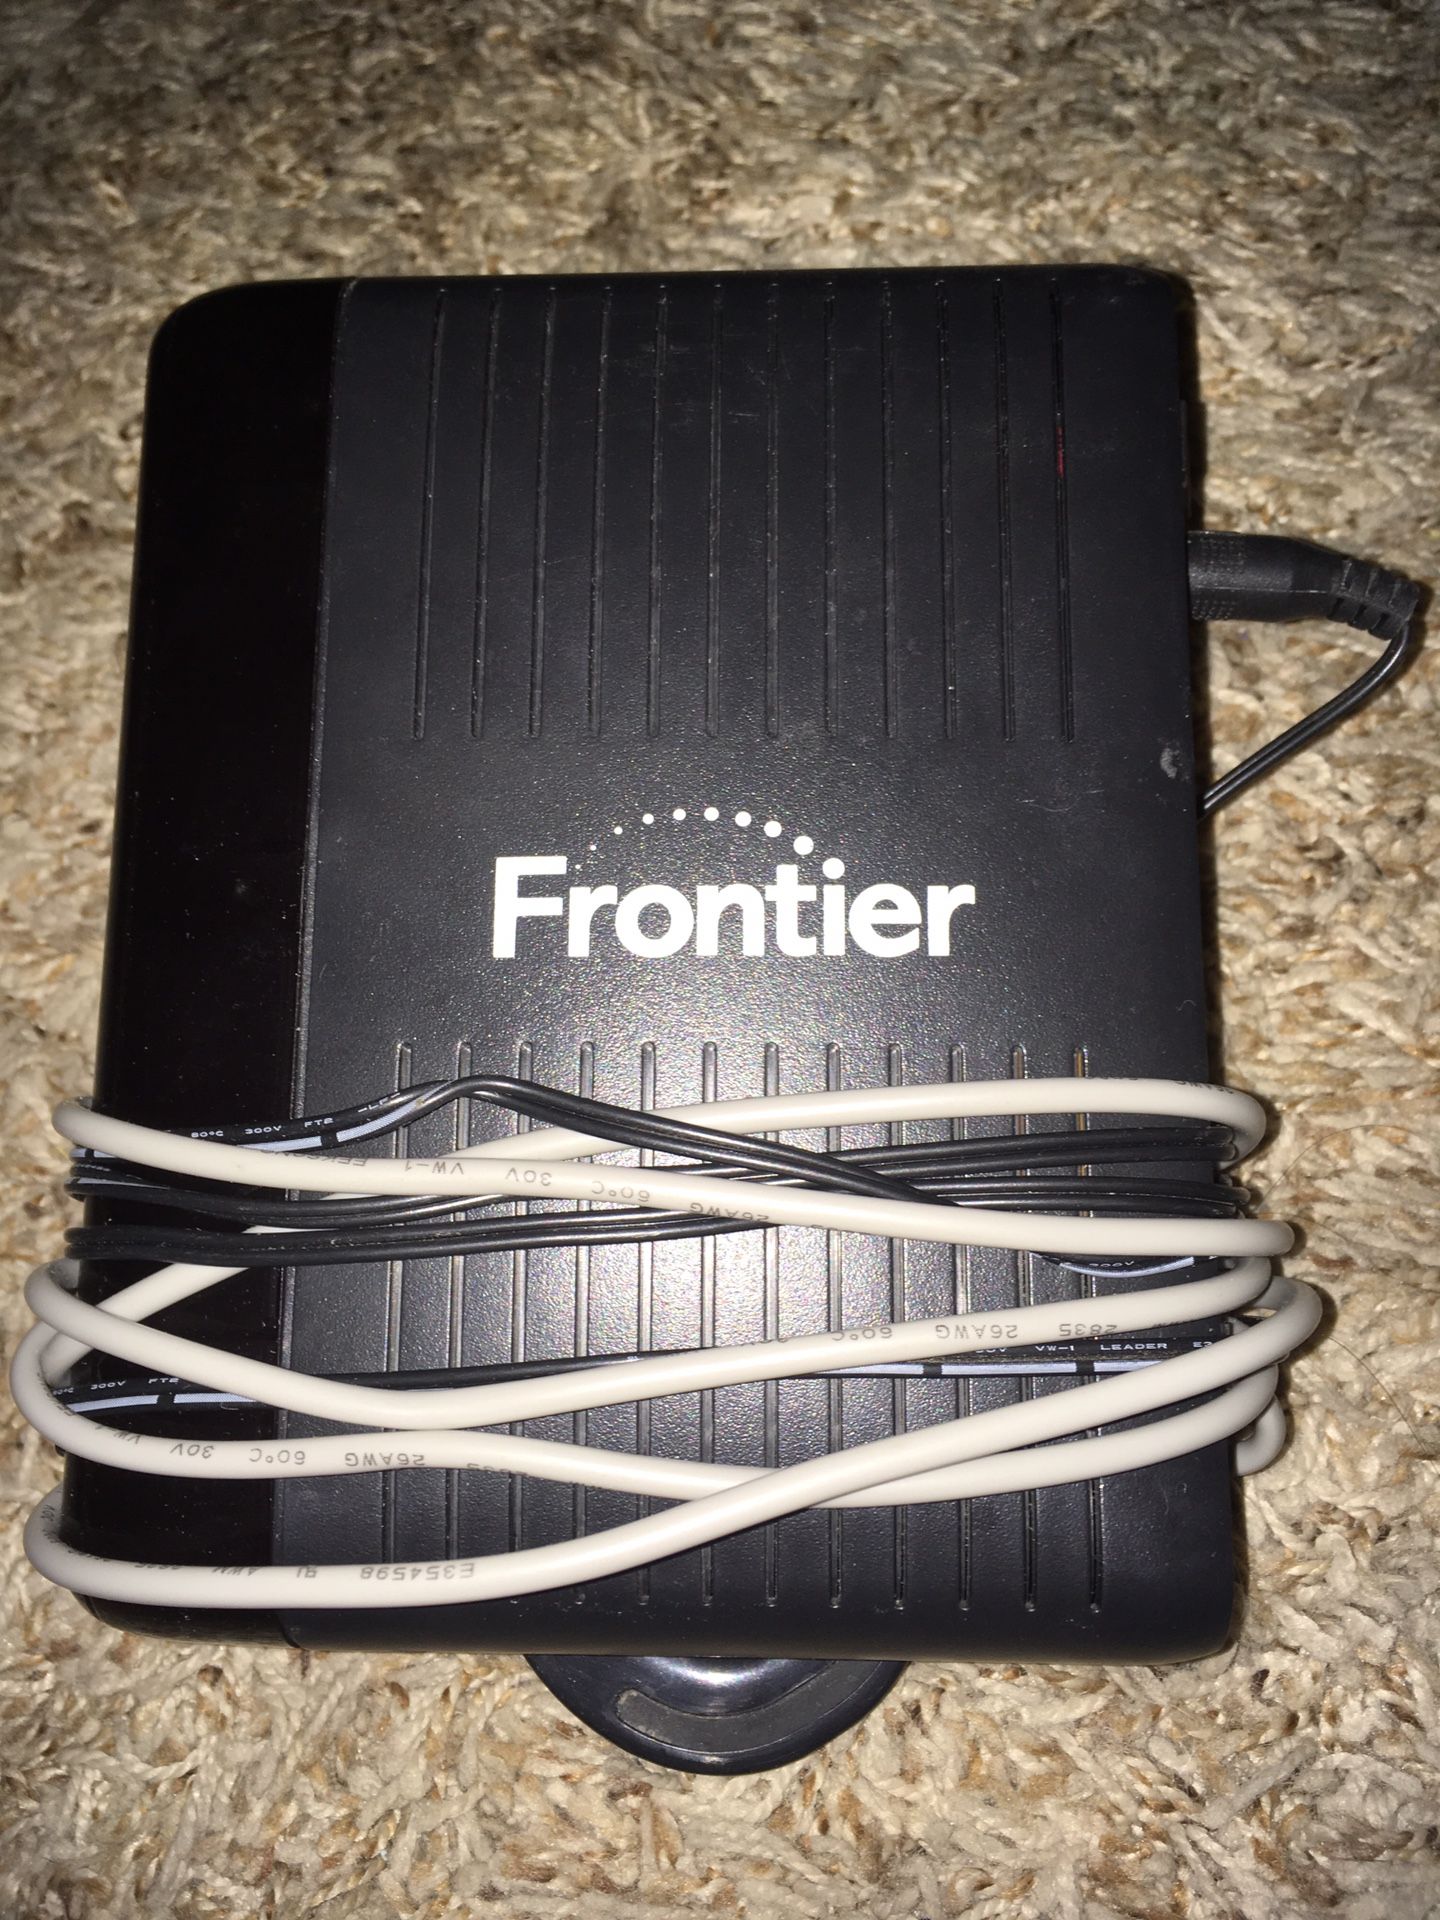 Current Frontier modem/router